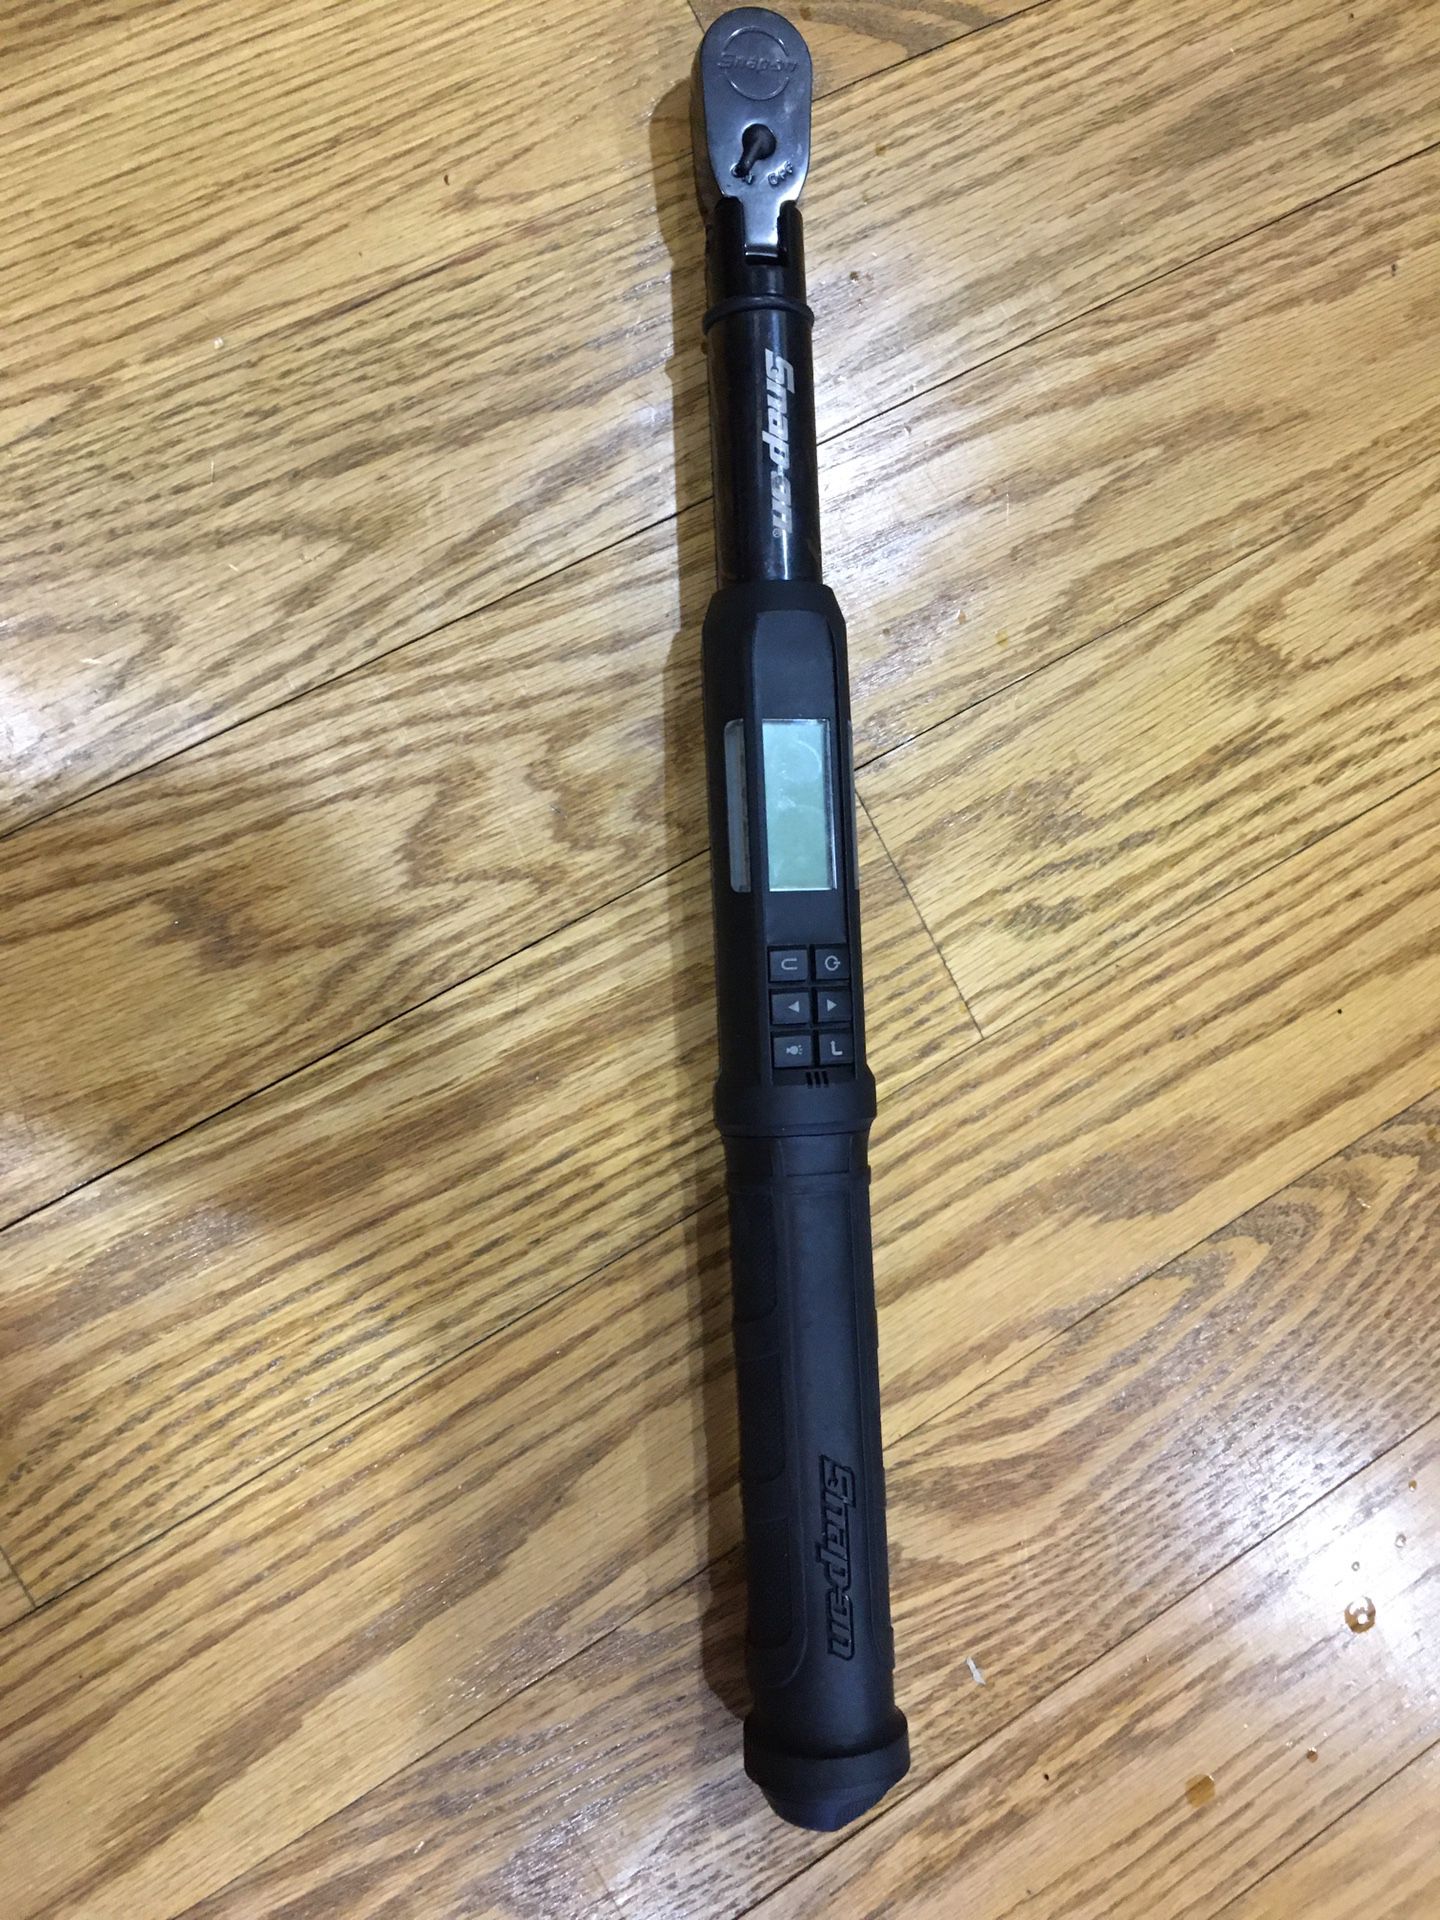 Snap On digital torque wrench